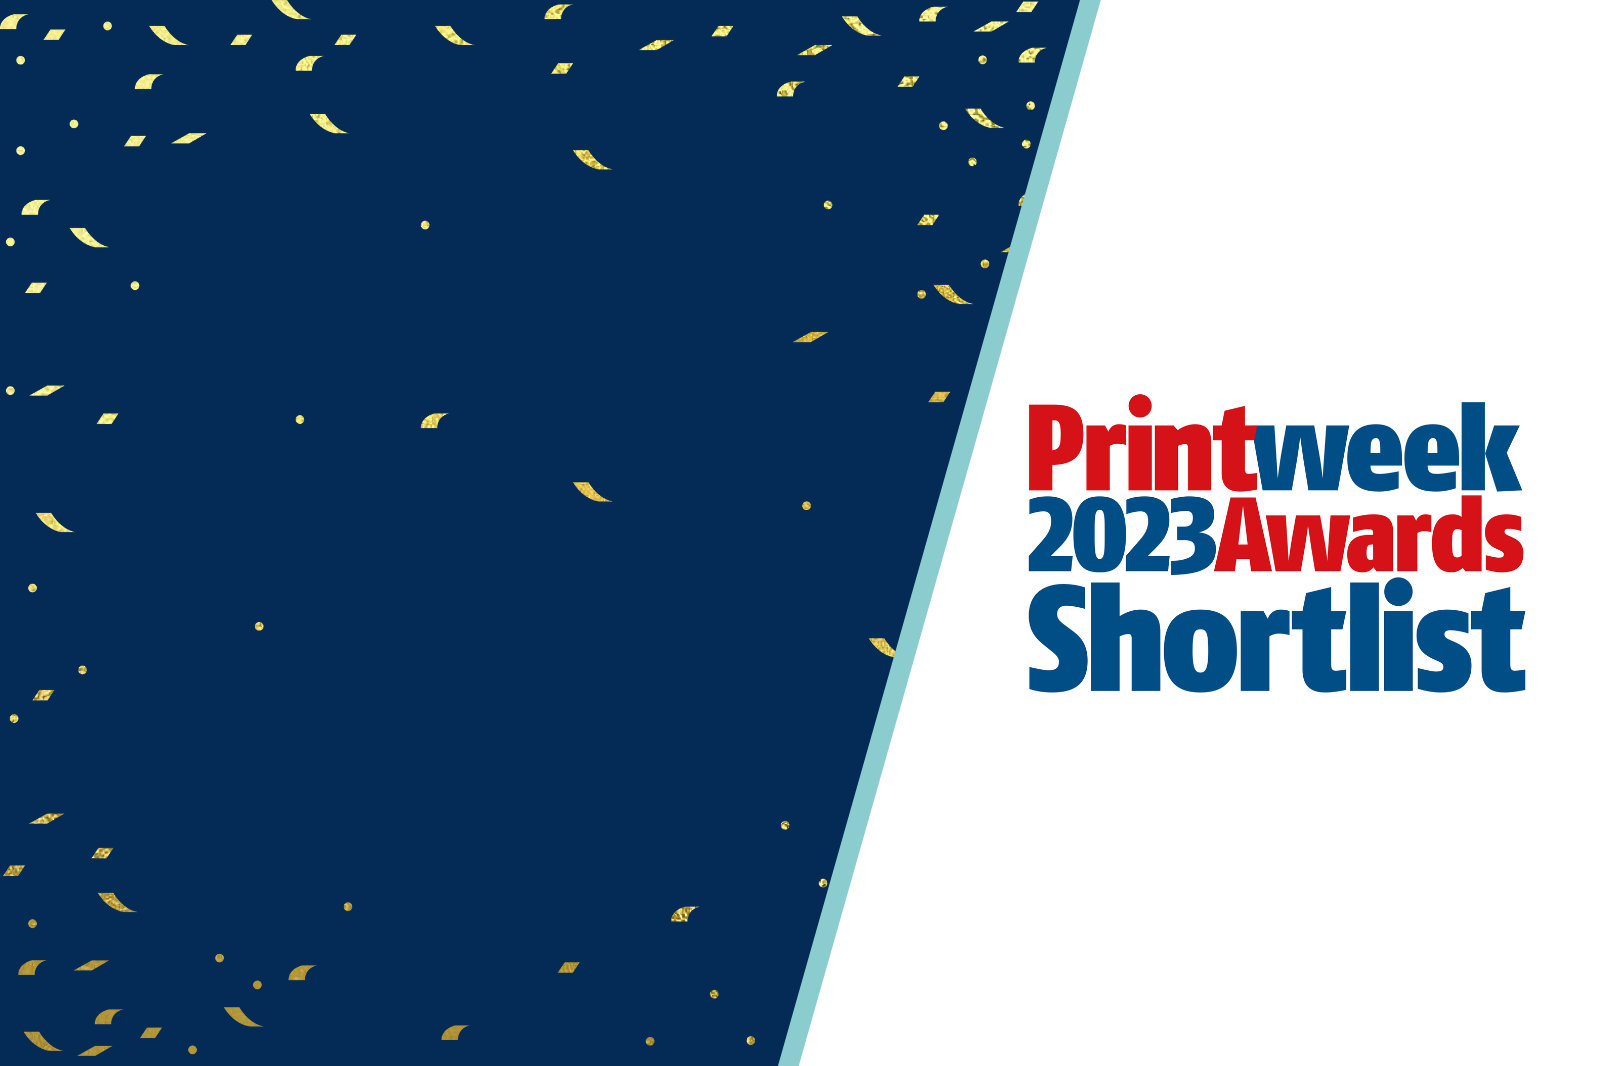 The logo for the Print Week Awards 2021 shortlist.